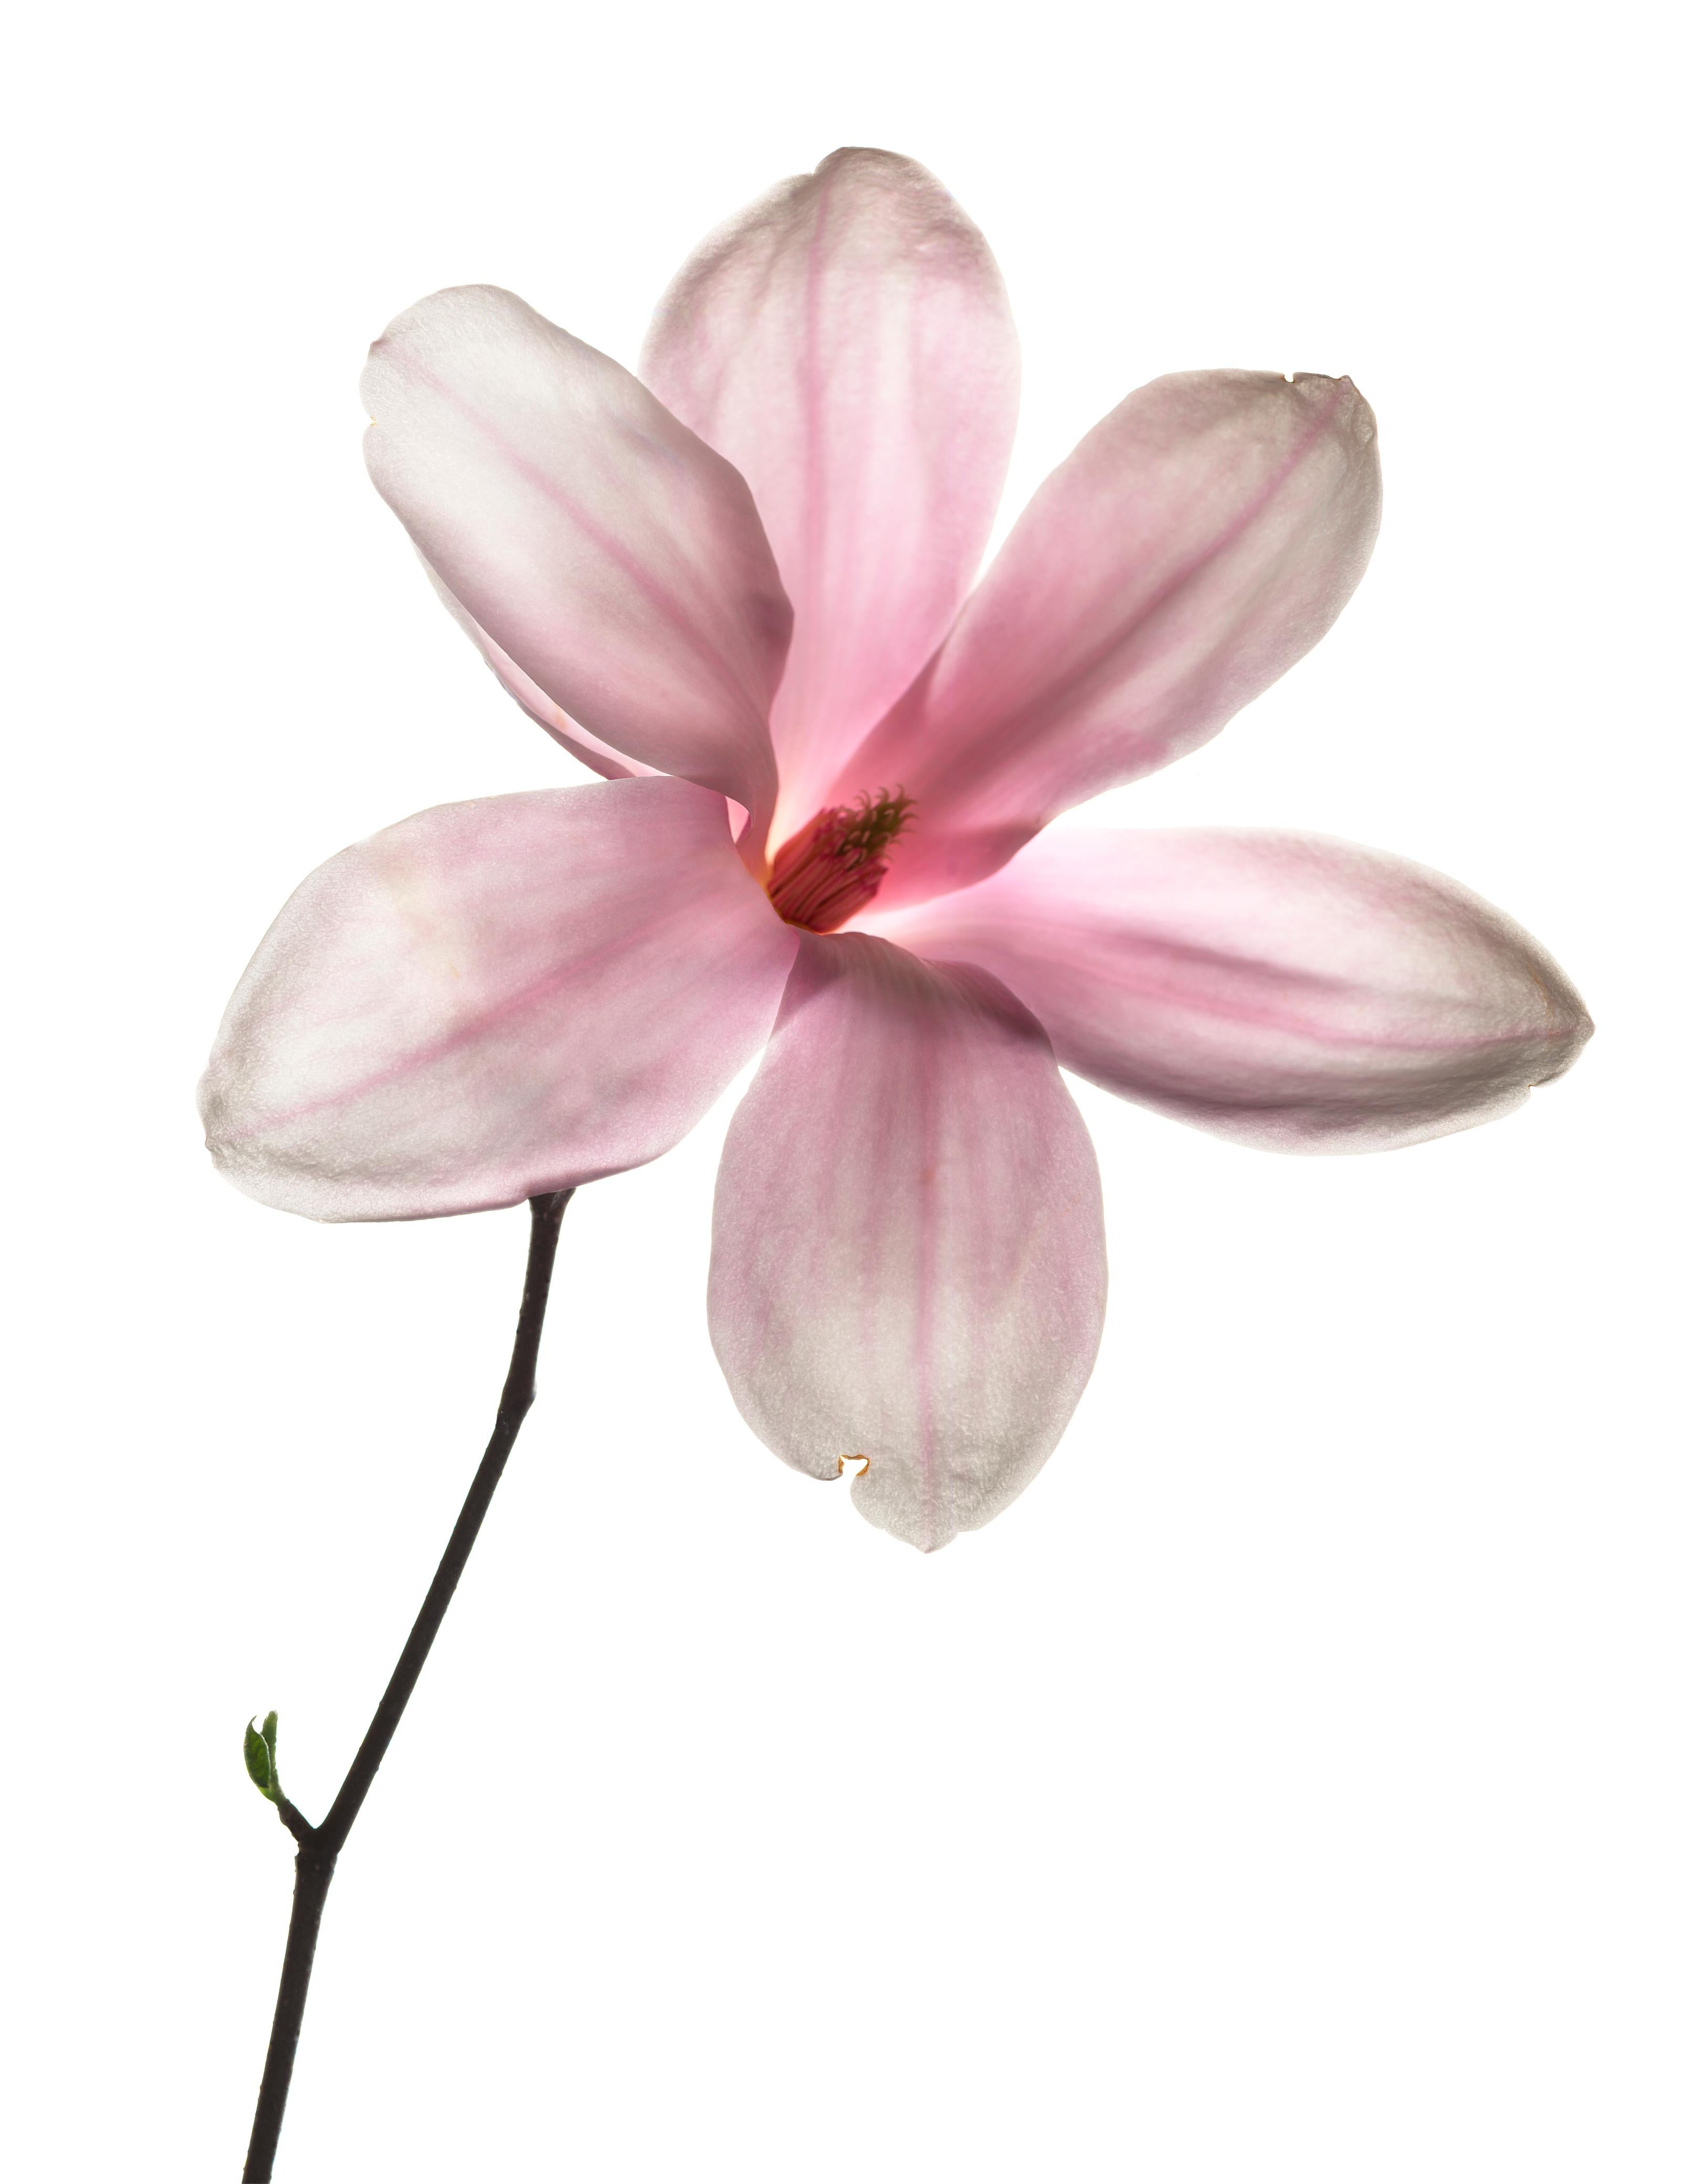 Chad Kleitsch Color Photograph - Untitled Flower # 113 (11" x 14")